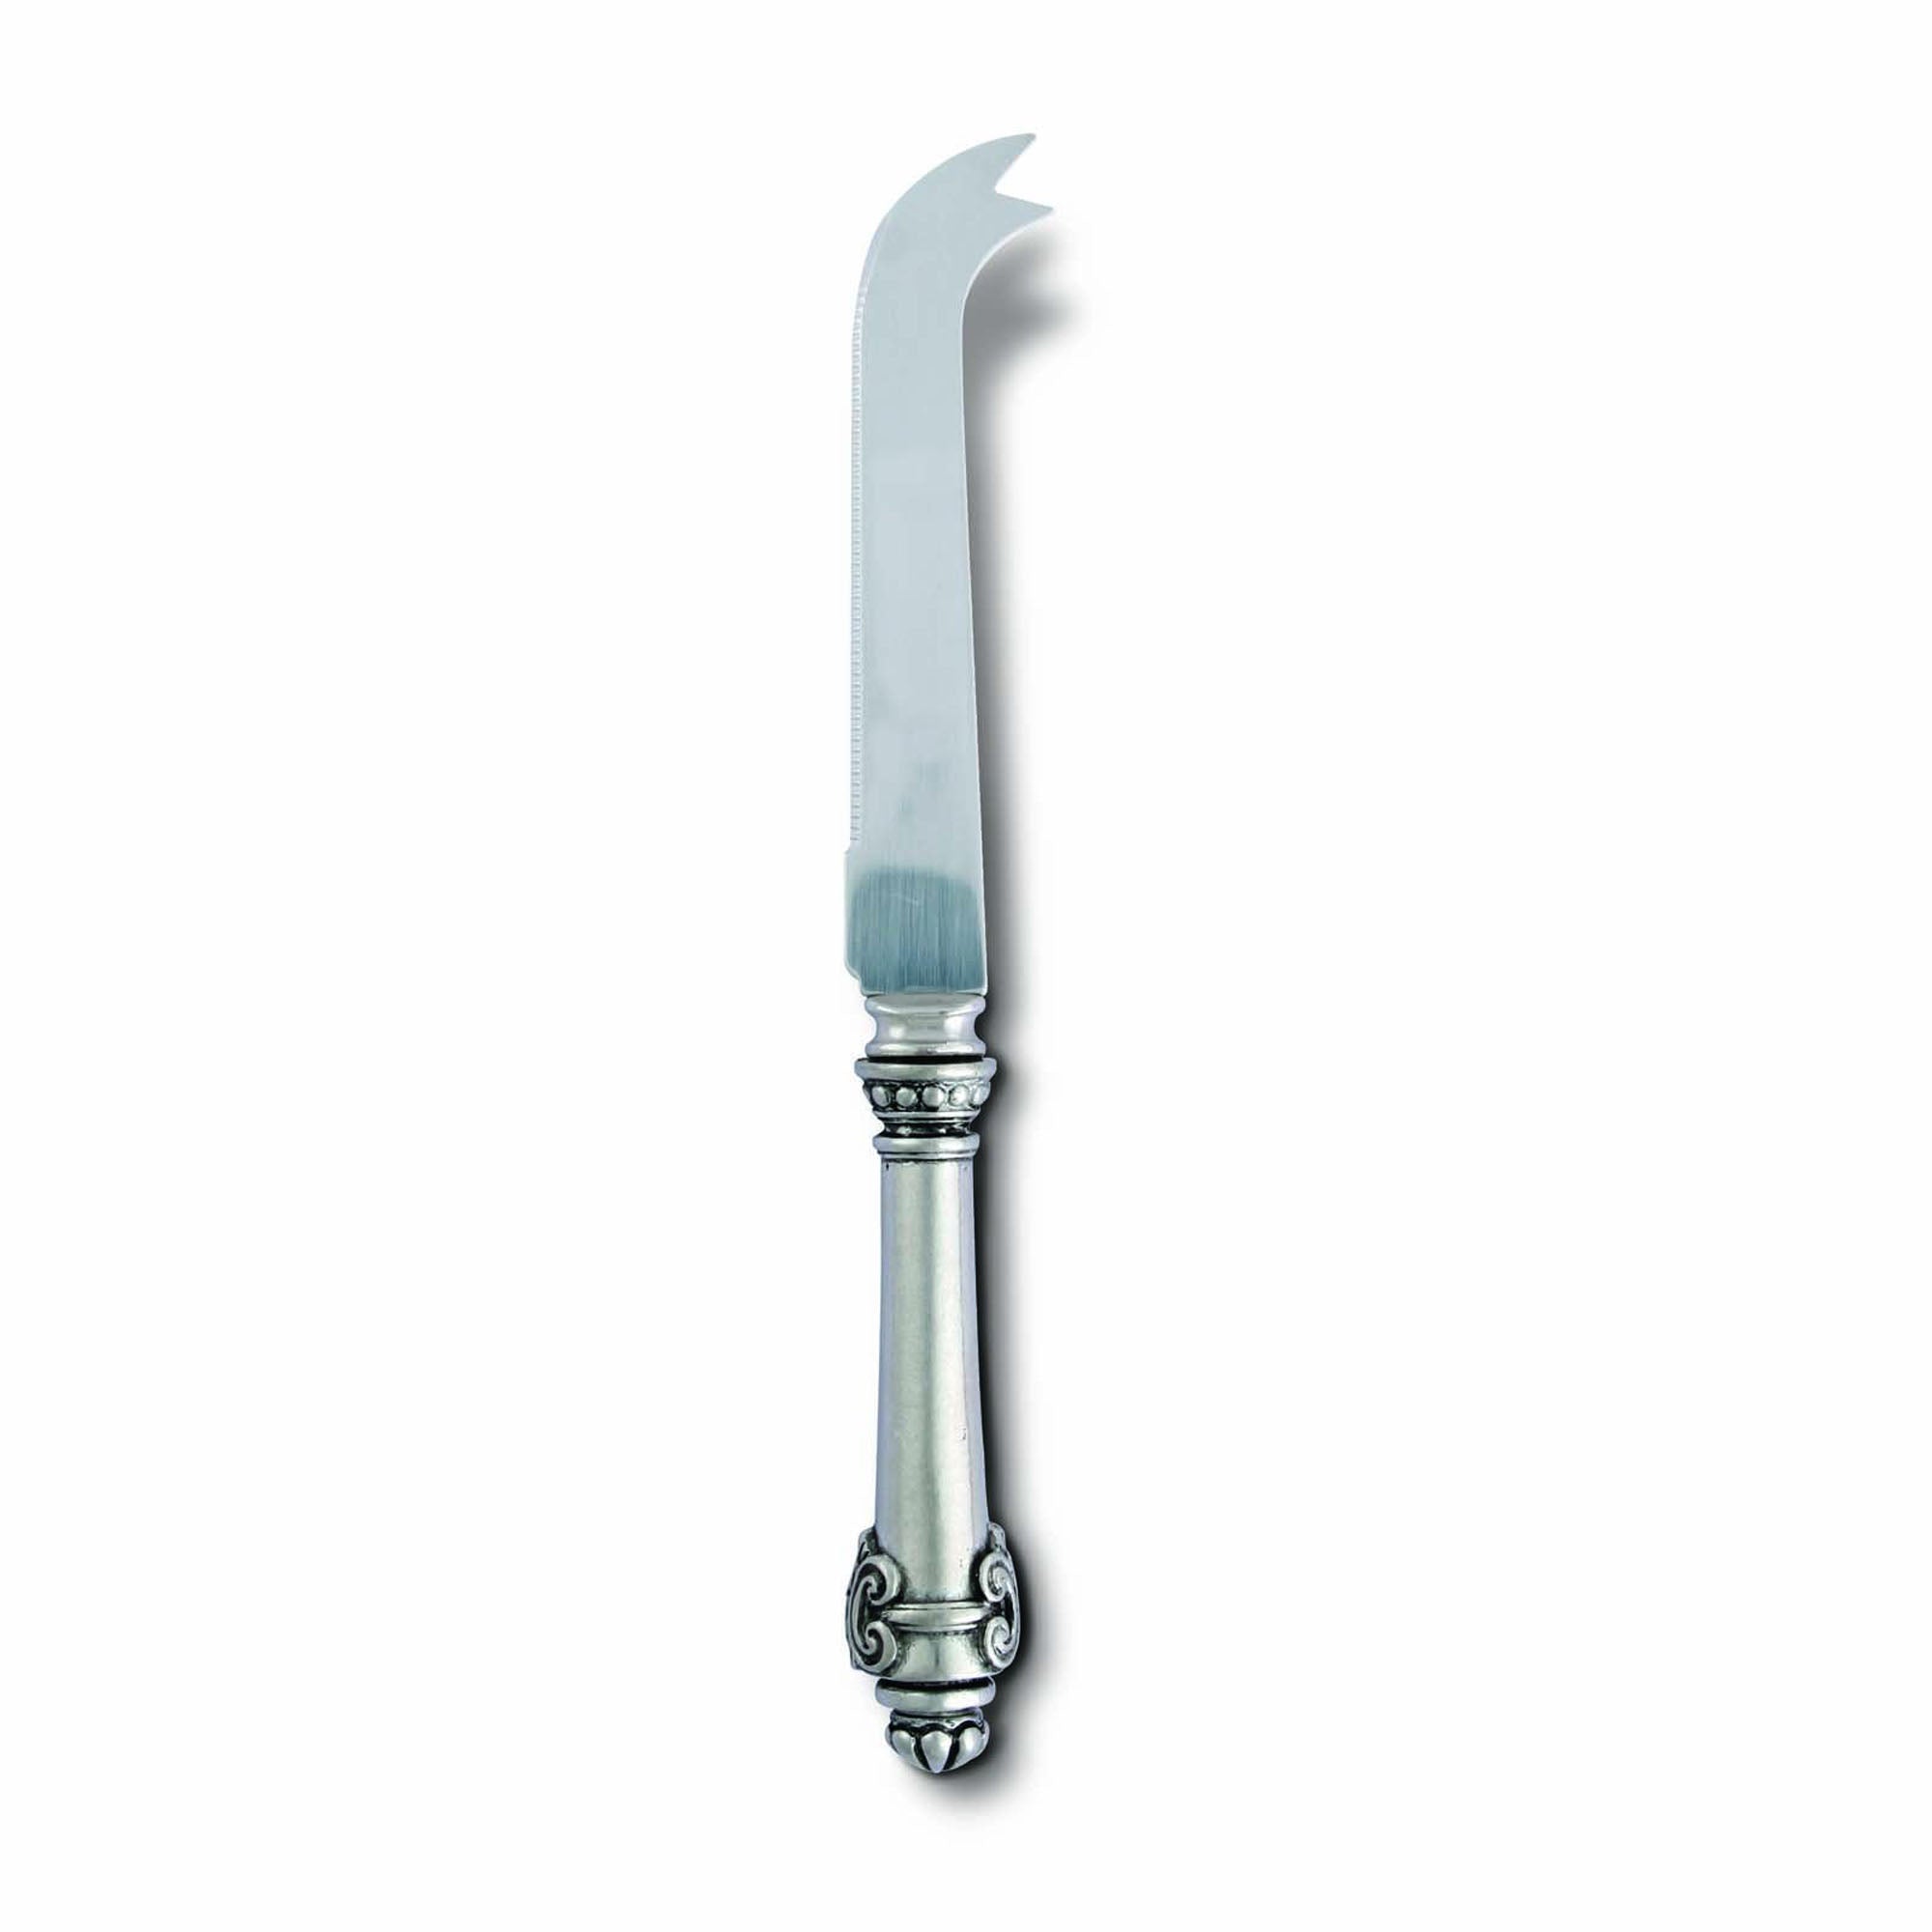 Vagabond House Medici Cheese Knife Product Image